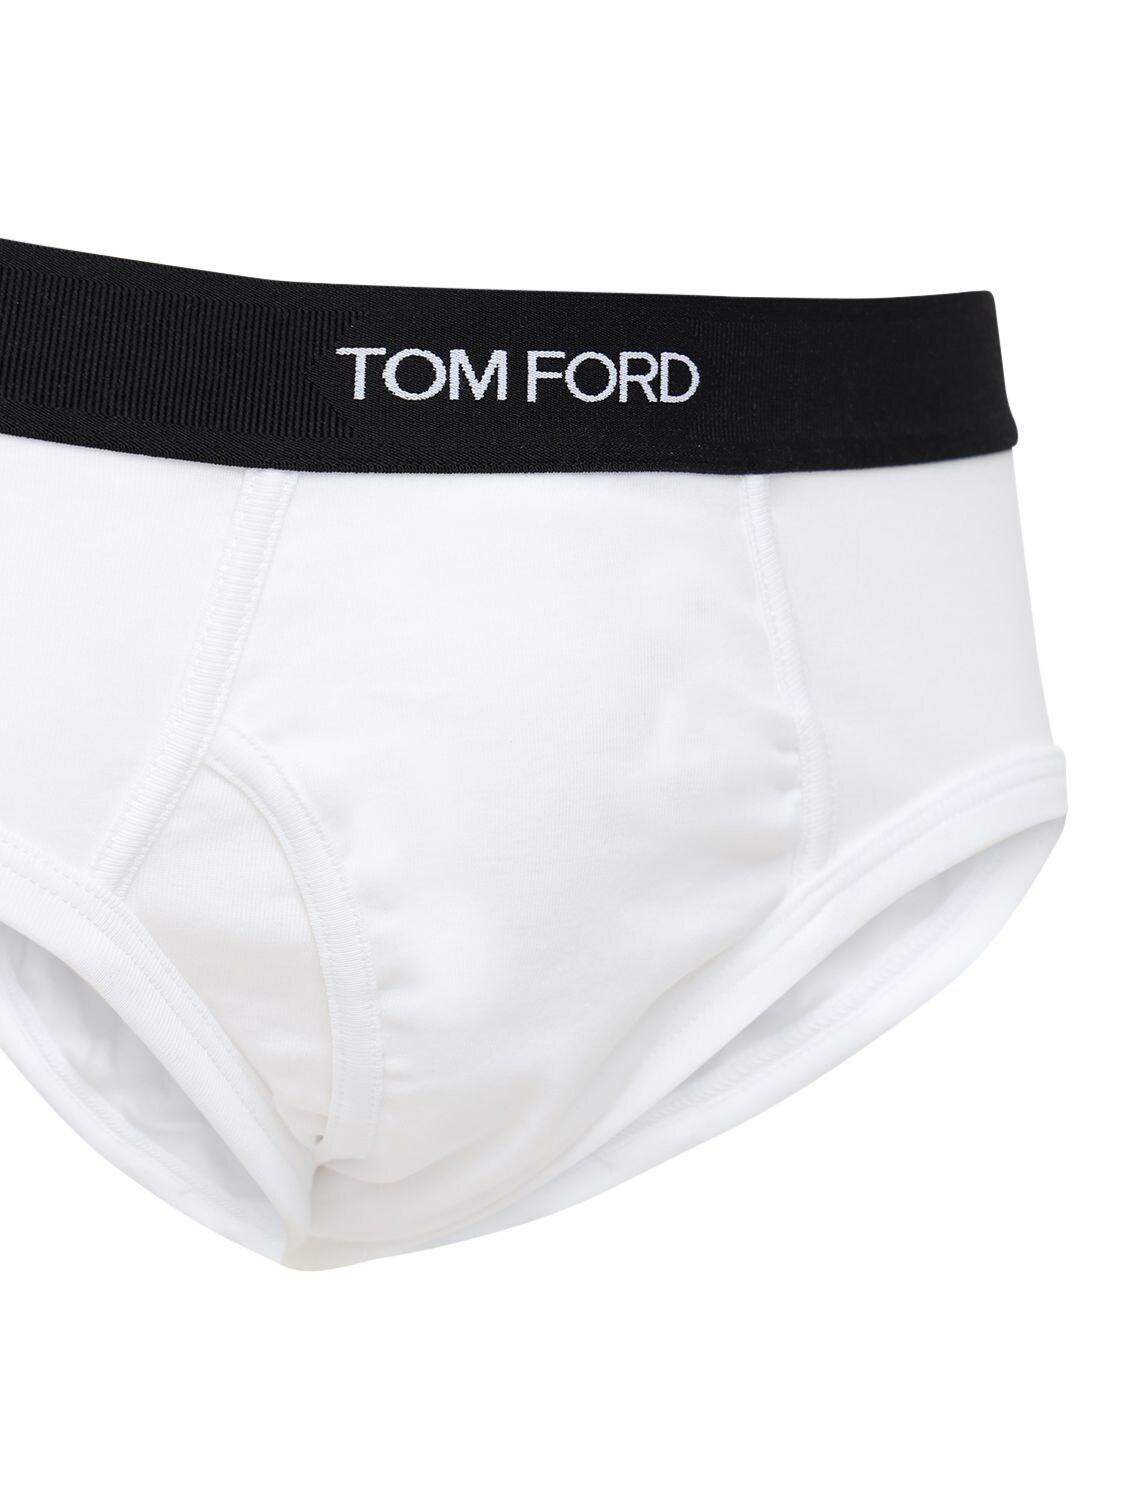 Tom Ford Pack Of 2 Logo Stretch Cotton Briefs in White for Men - Lyst